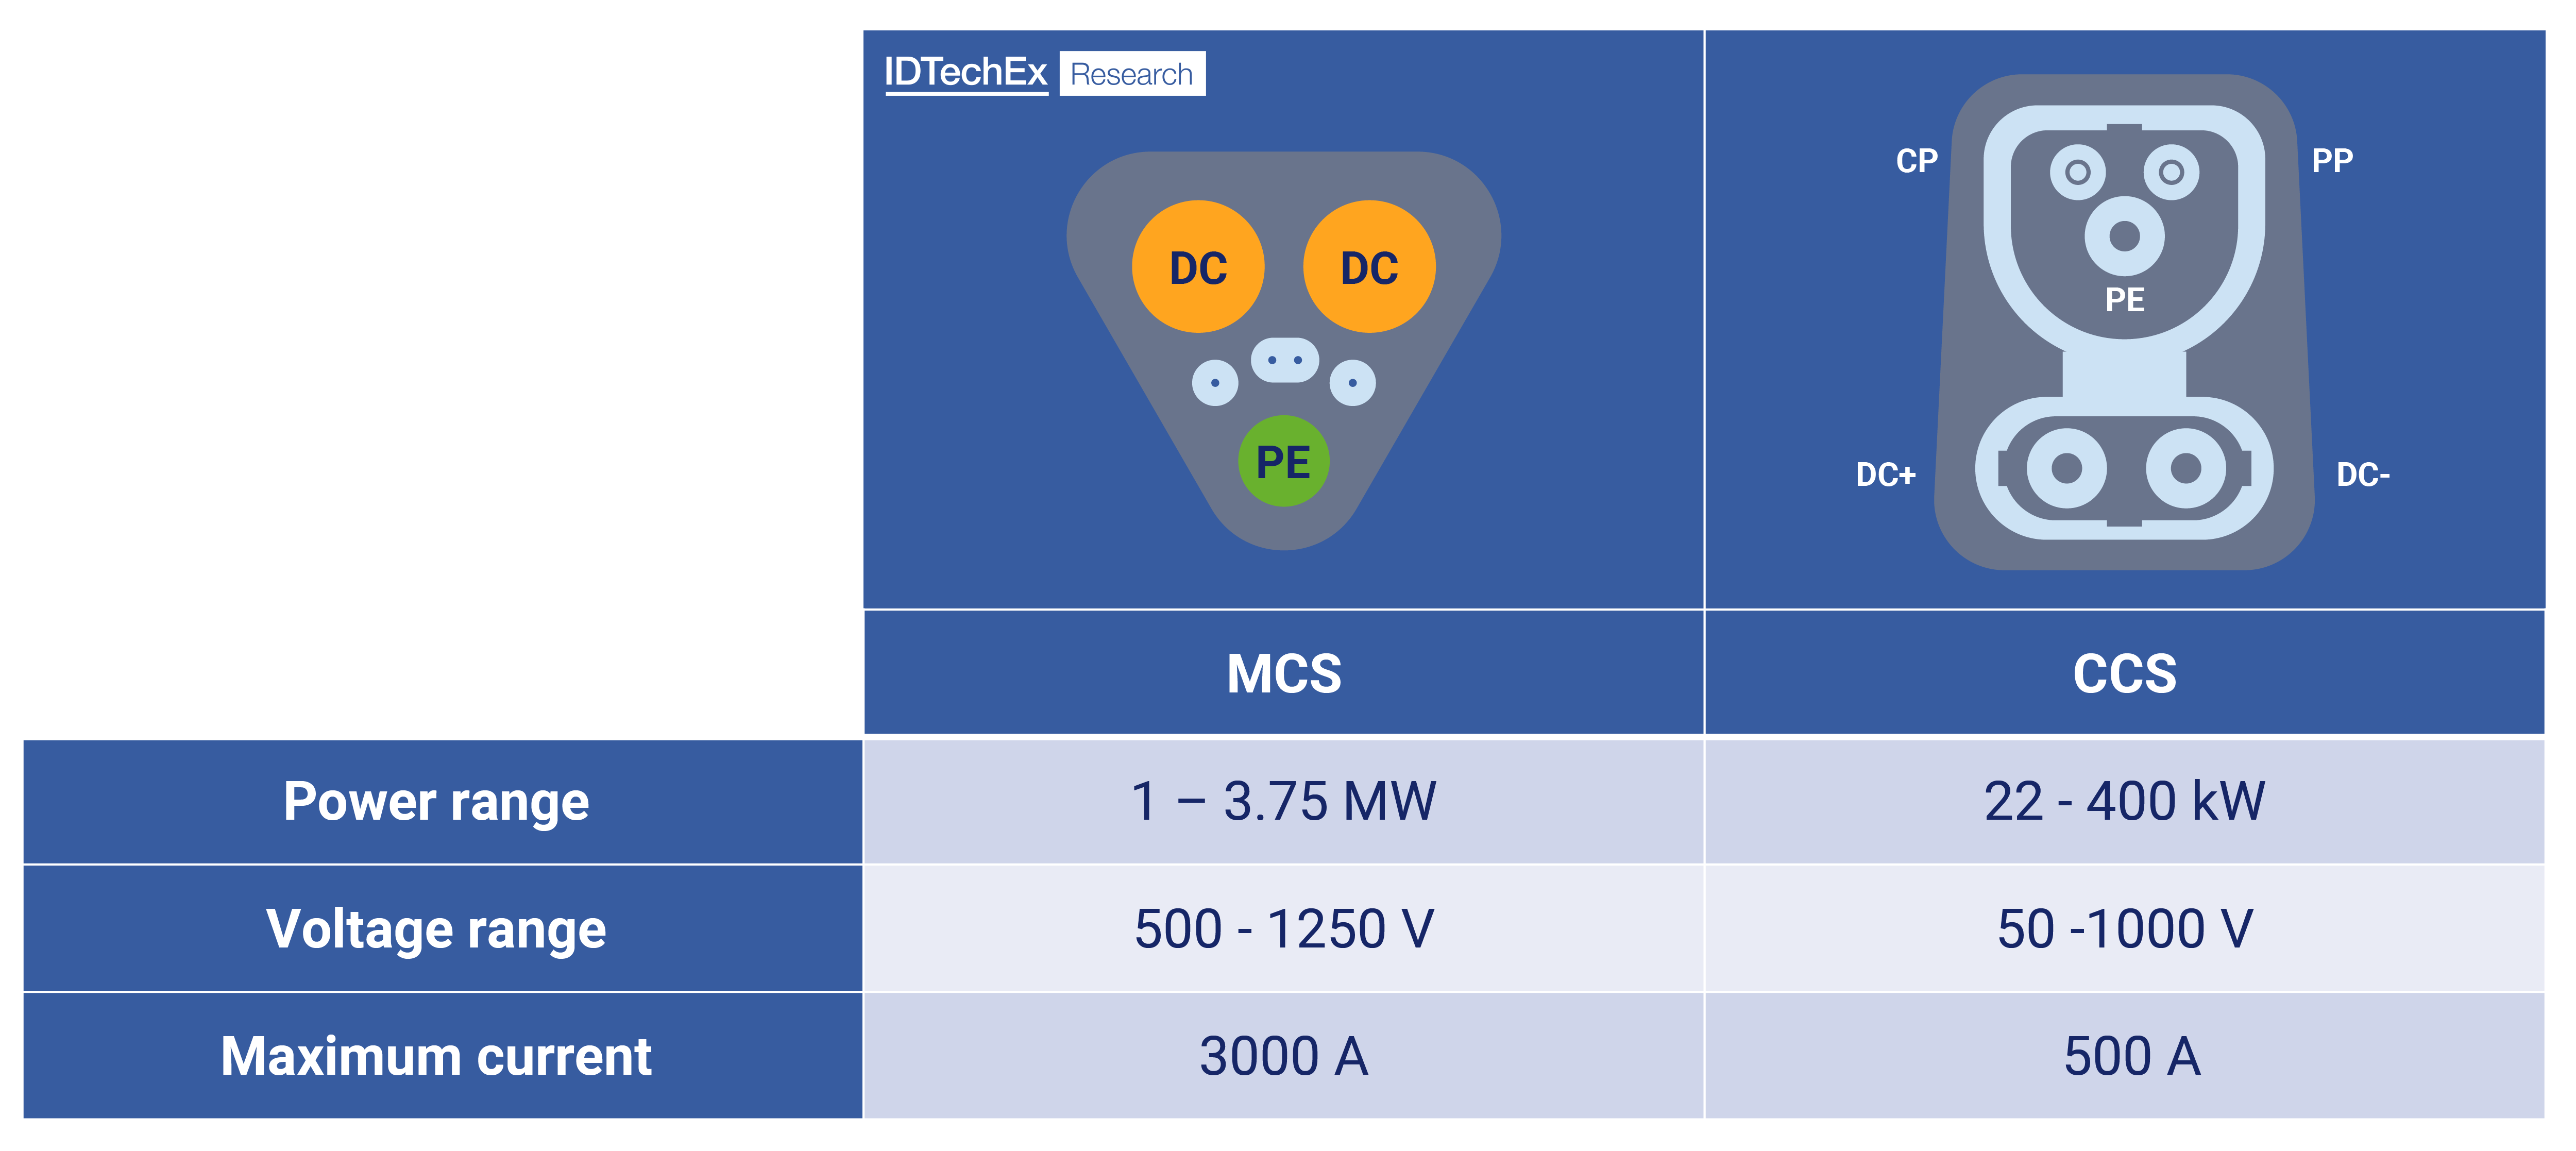 MCS specifications and comparison with CCS. Note: the above values are documented as possible but may not be implemented in typical installations. Source: IDTechEx